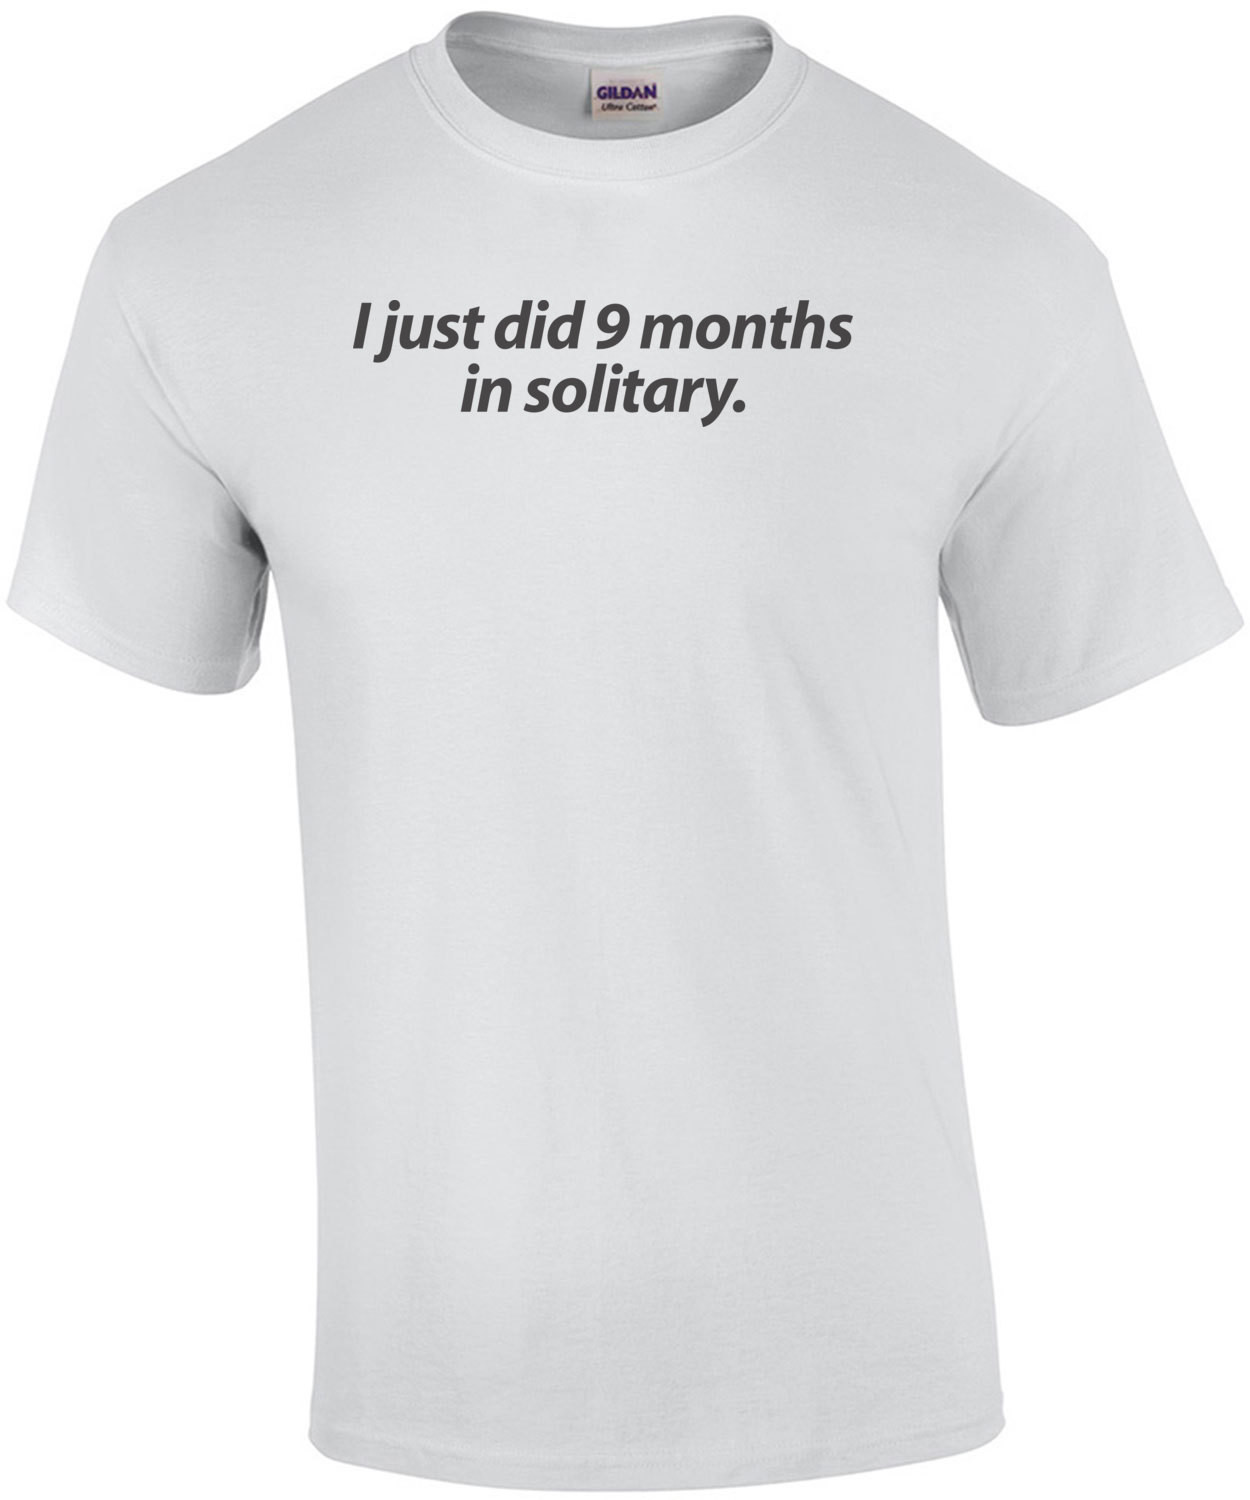 I Just Did 9 Months In Solitary Baby Shirt